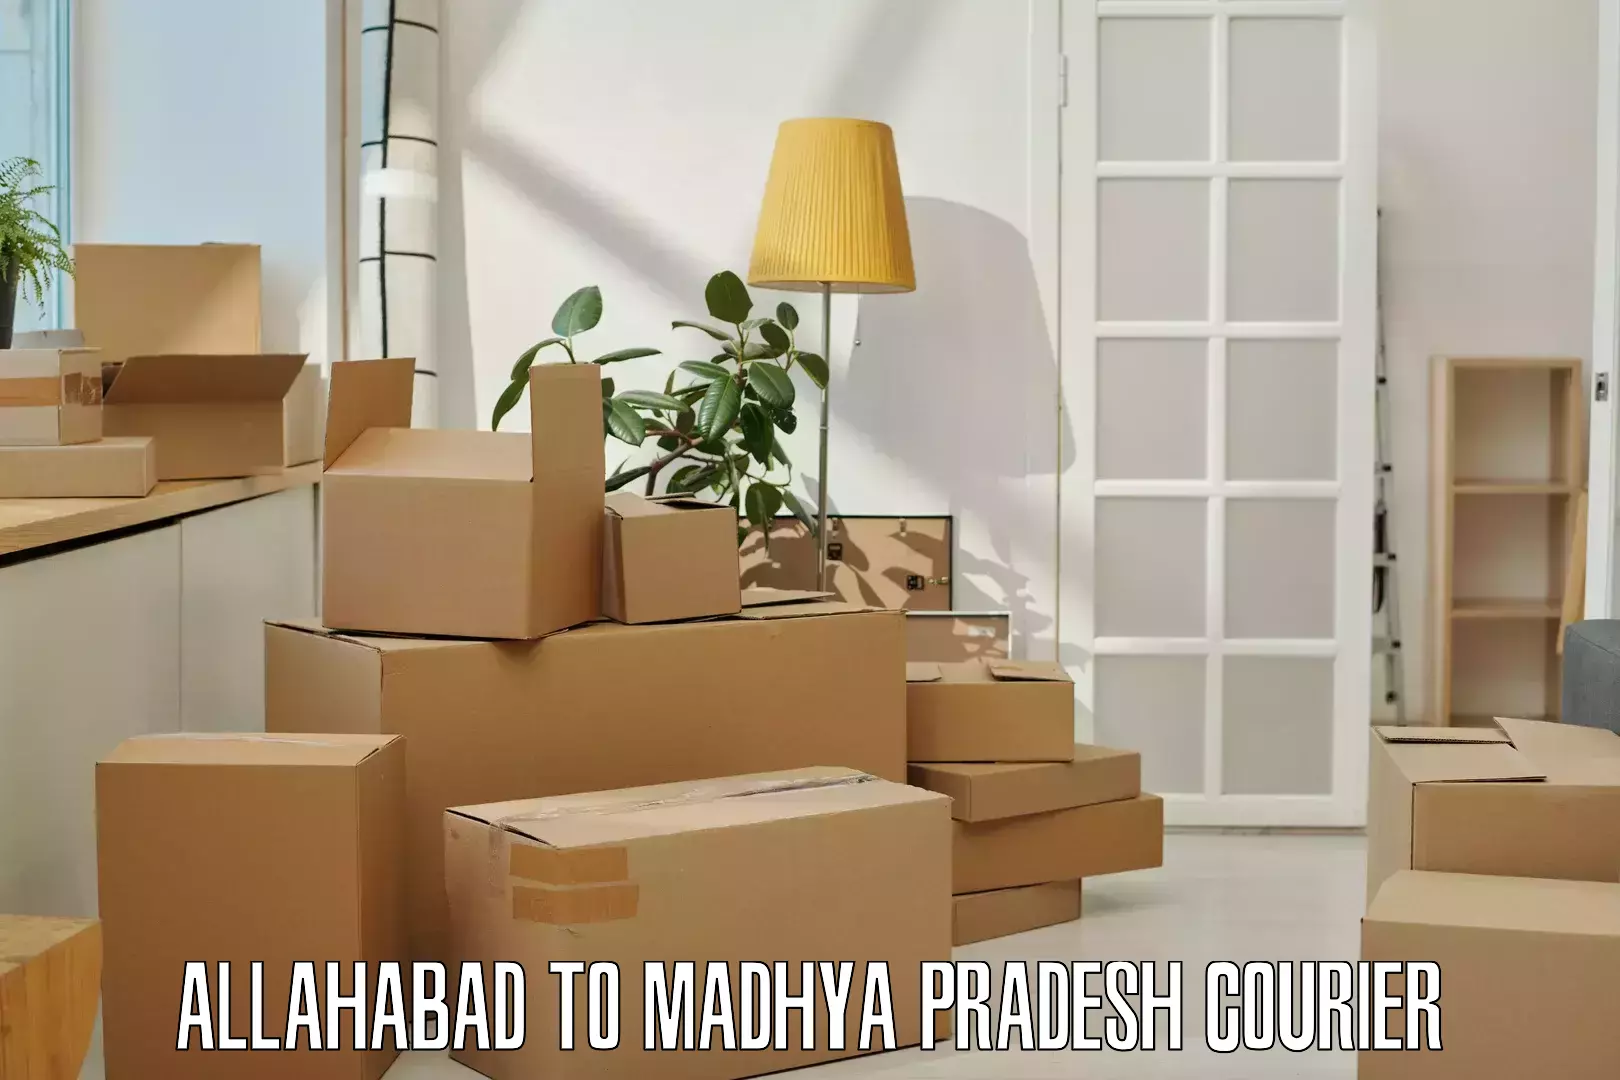 Doorstep delivery service Allahabad to Indore